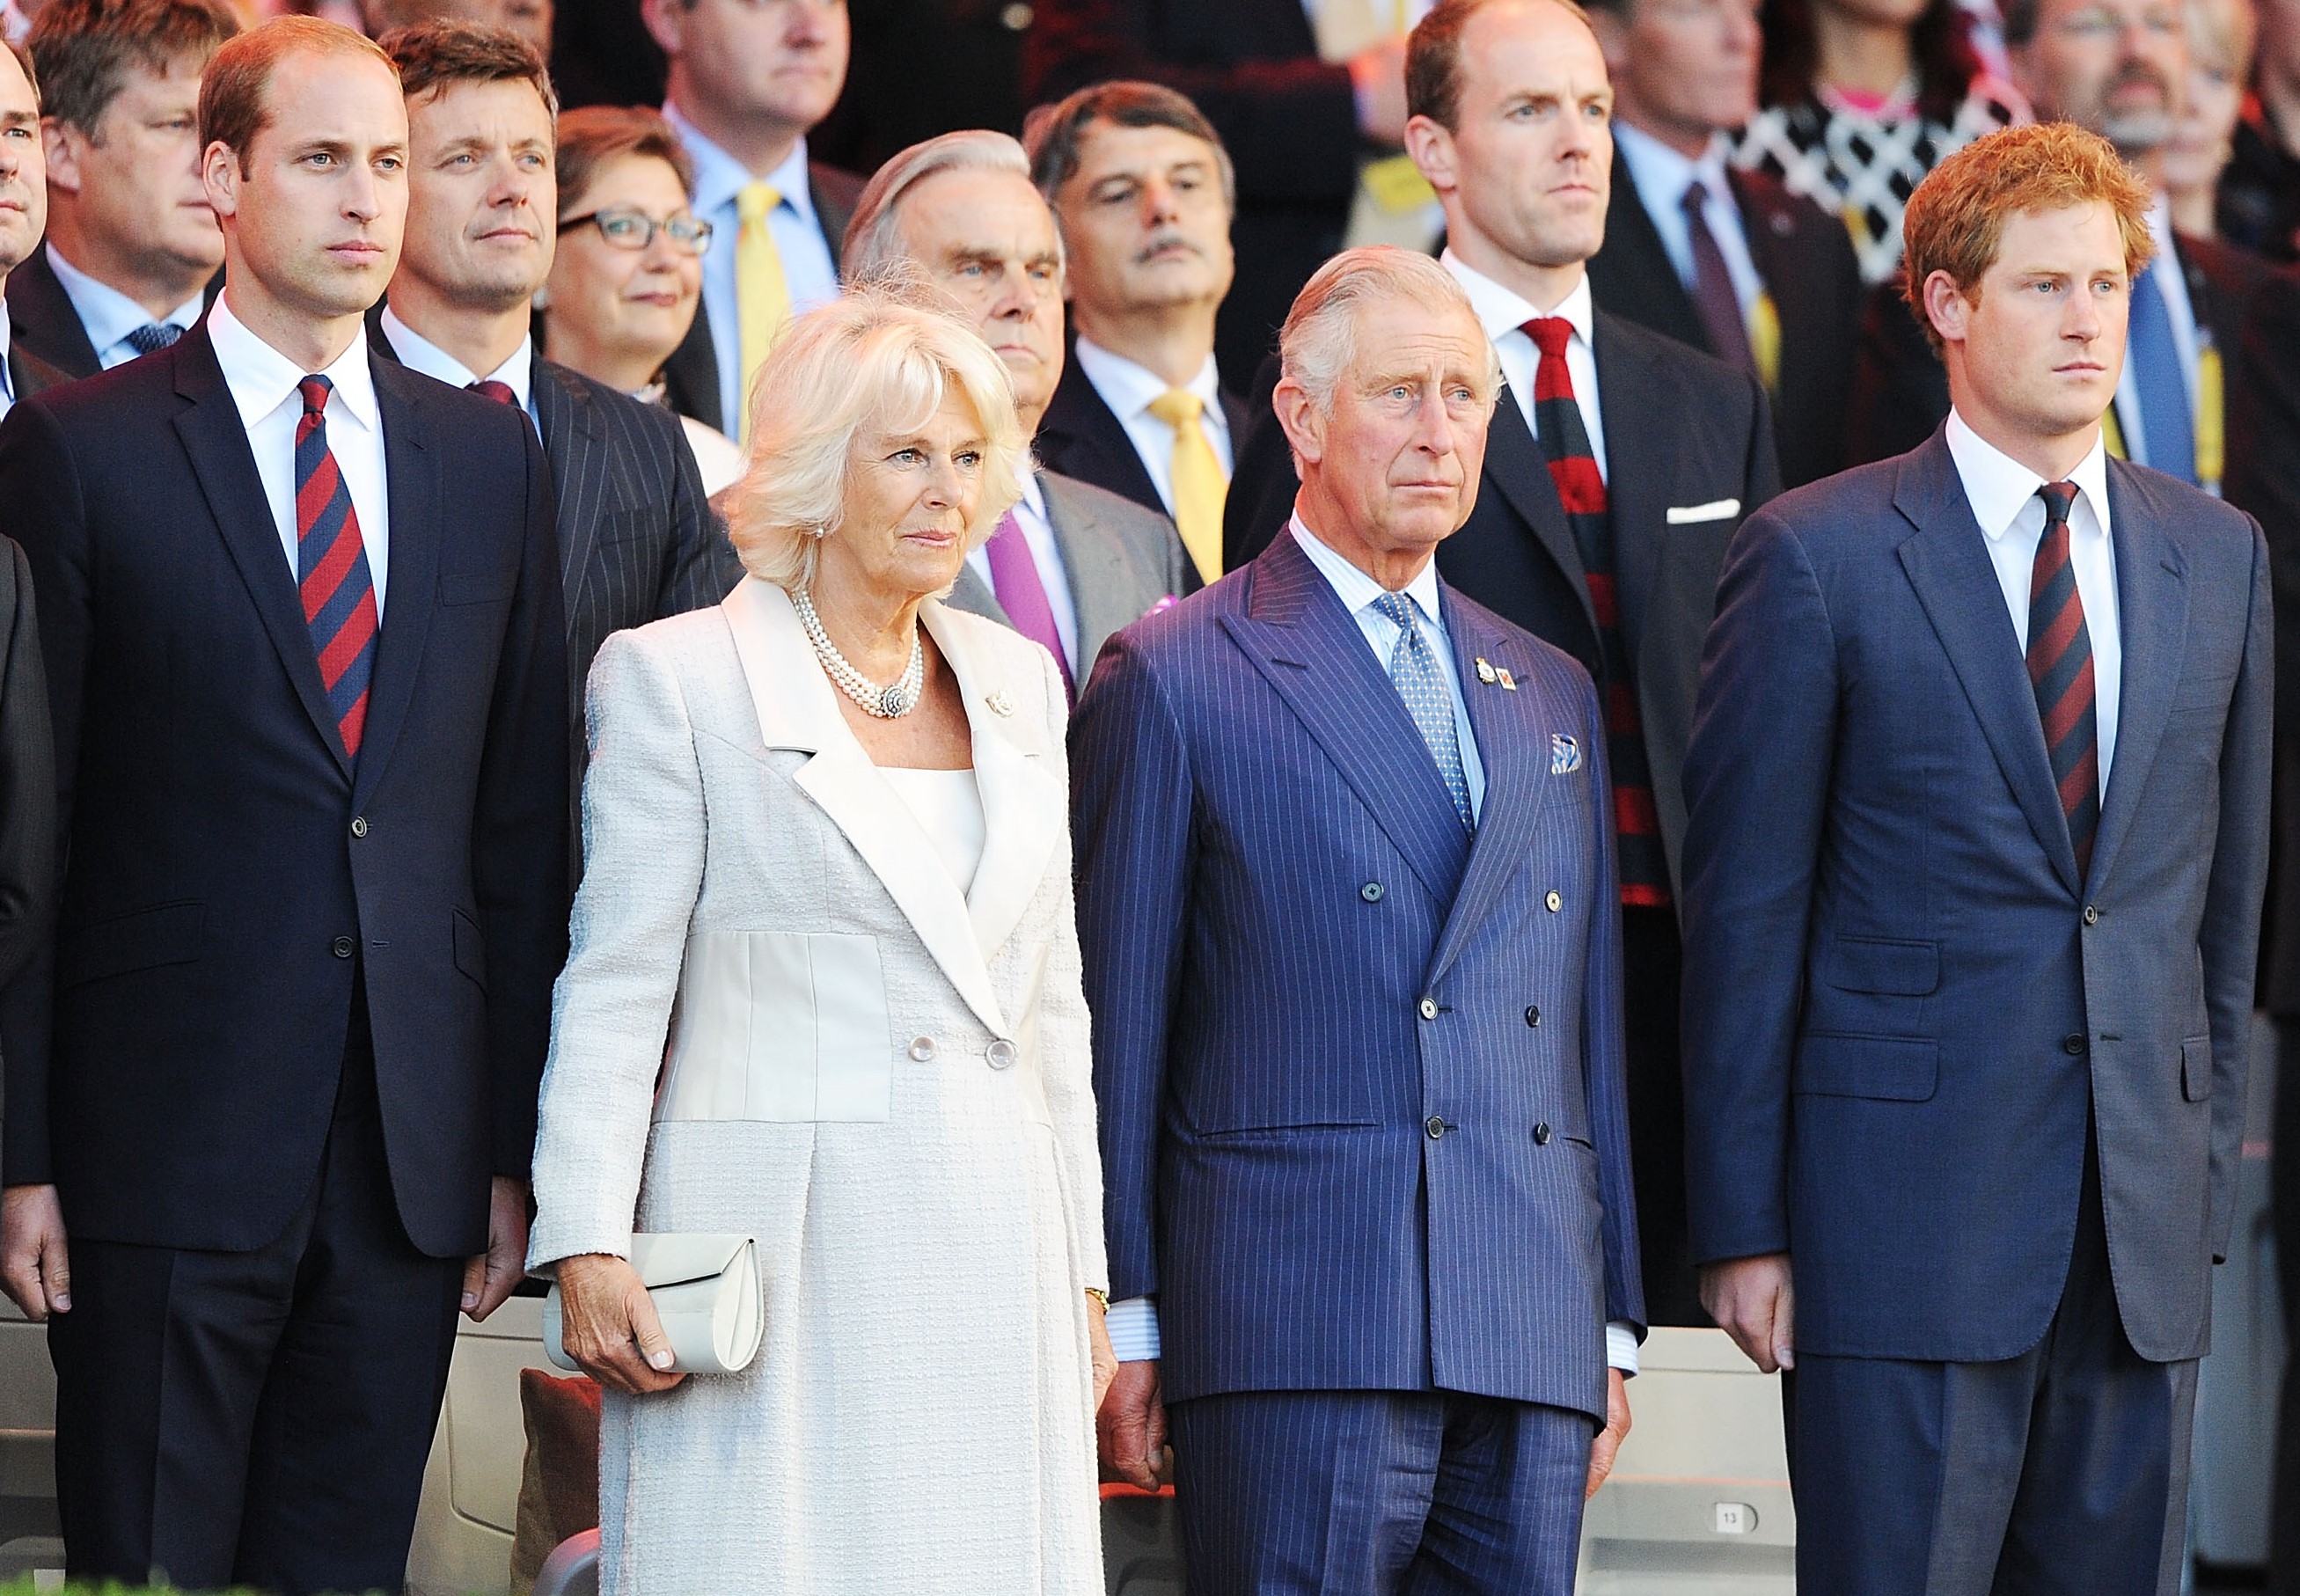 Prince William, Camilla Parker Bowles, Prince Charles, and Prince Harry at an Opening Ceremony for the Invictus Games